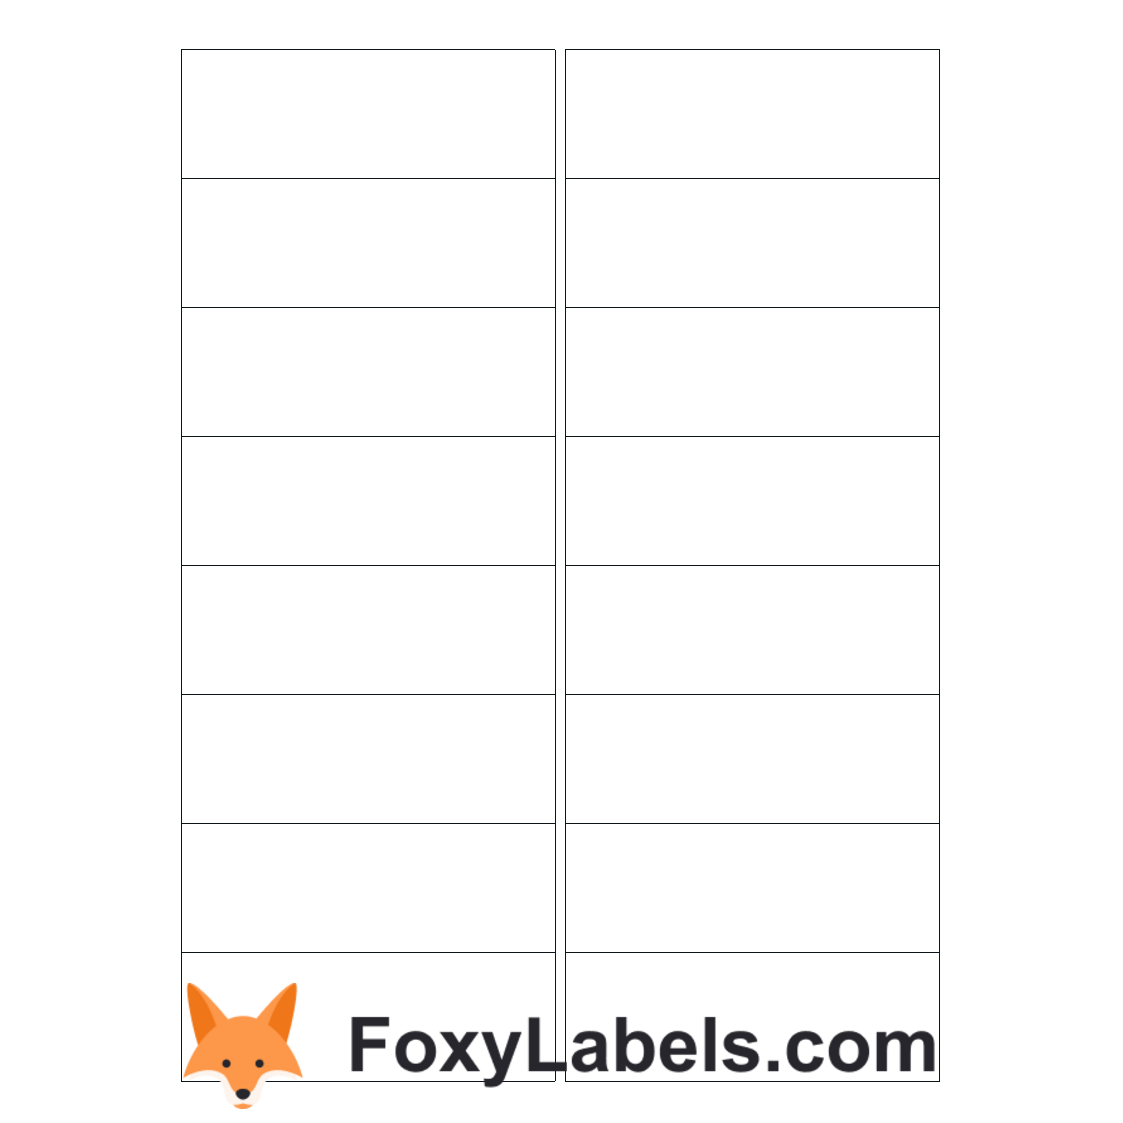 Avery L7562 label template for Google Docs